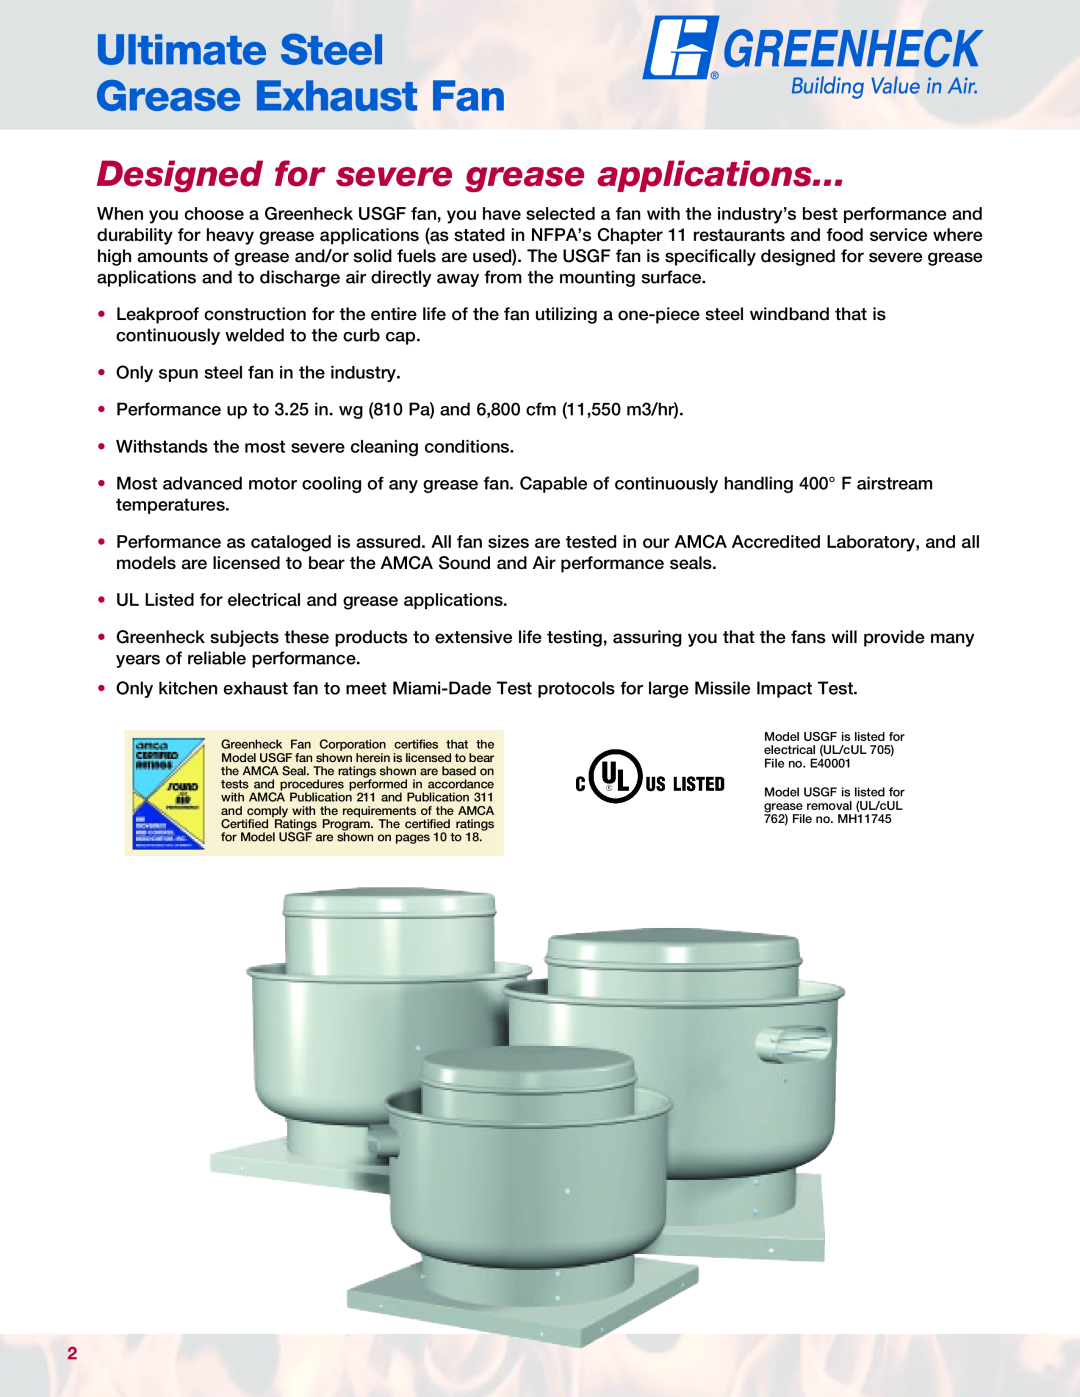 Greenheck Fan USGF manual Ultimate Steel Grease Exhaust Fan, Designed for severe grease applications 